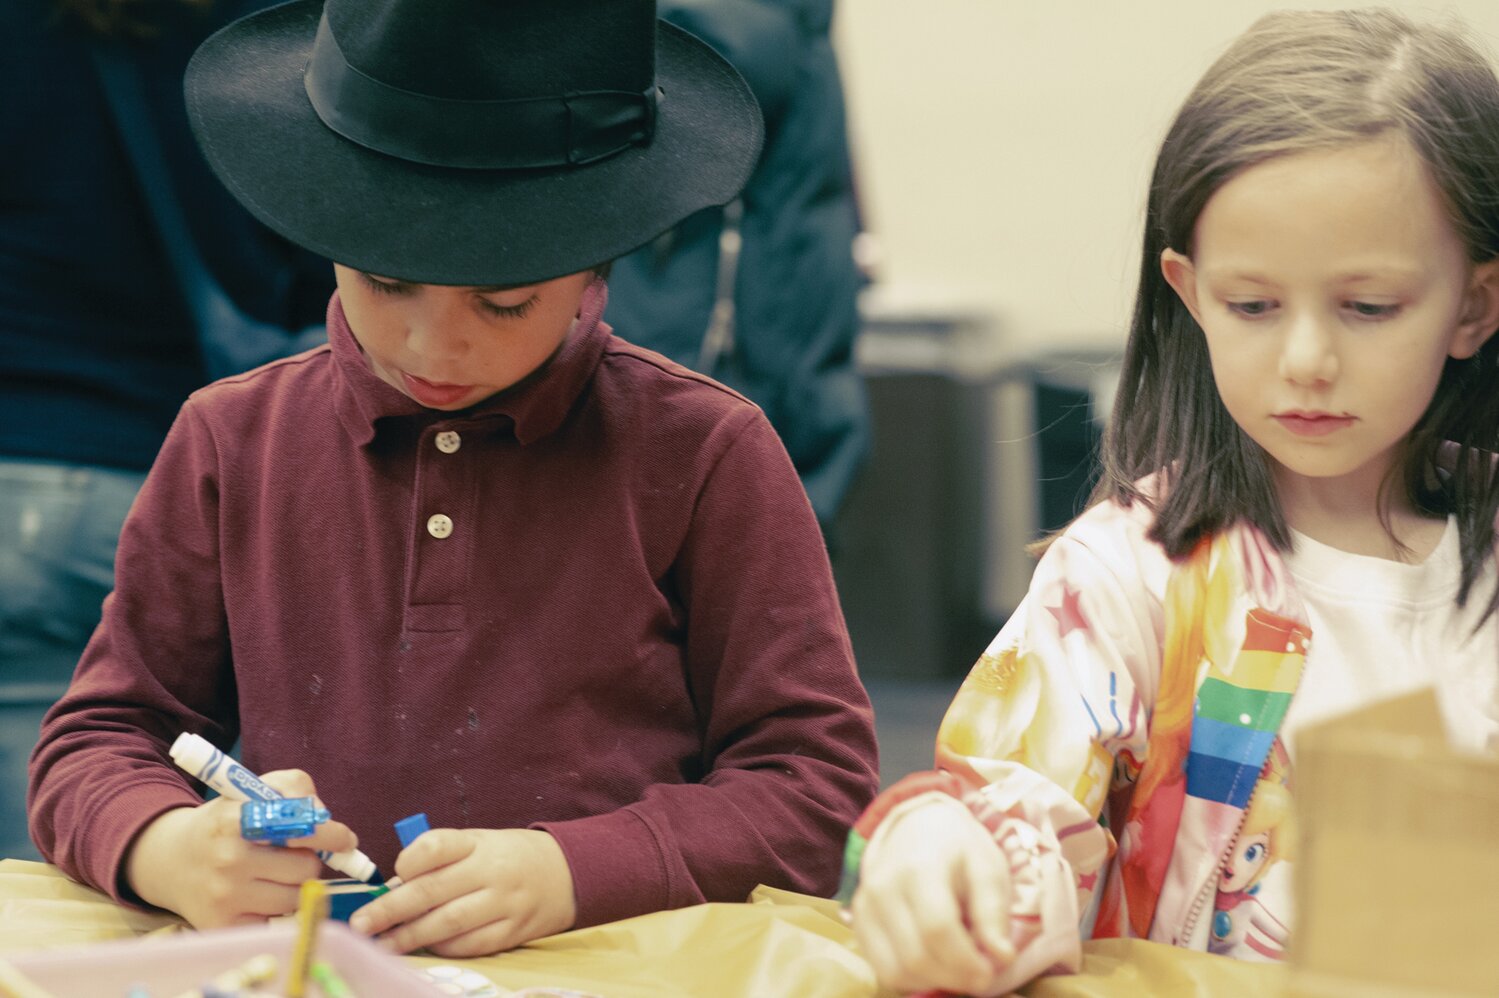 Yossi Trus, left, and Ava Berkowitz color their dreidels before starting to play the game at Chabad Lubavitch of Doylestown’s Light Up Doylestown – Public Menorah Lighting Dec. 12 at the Bucks County Justice Center.